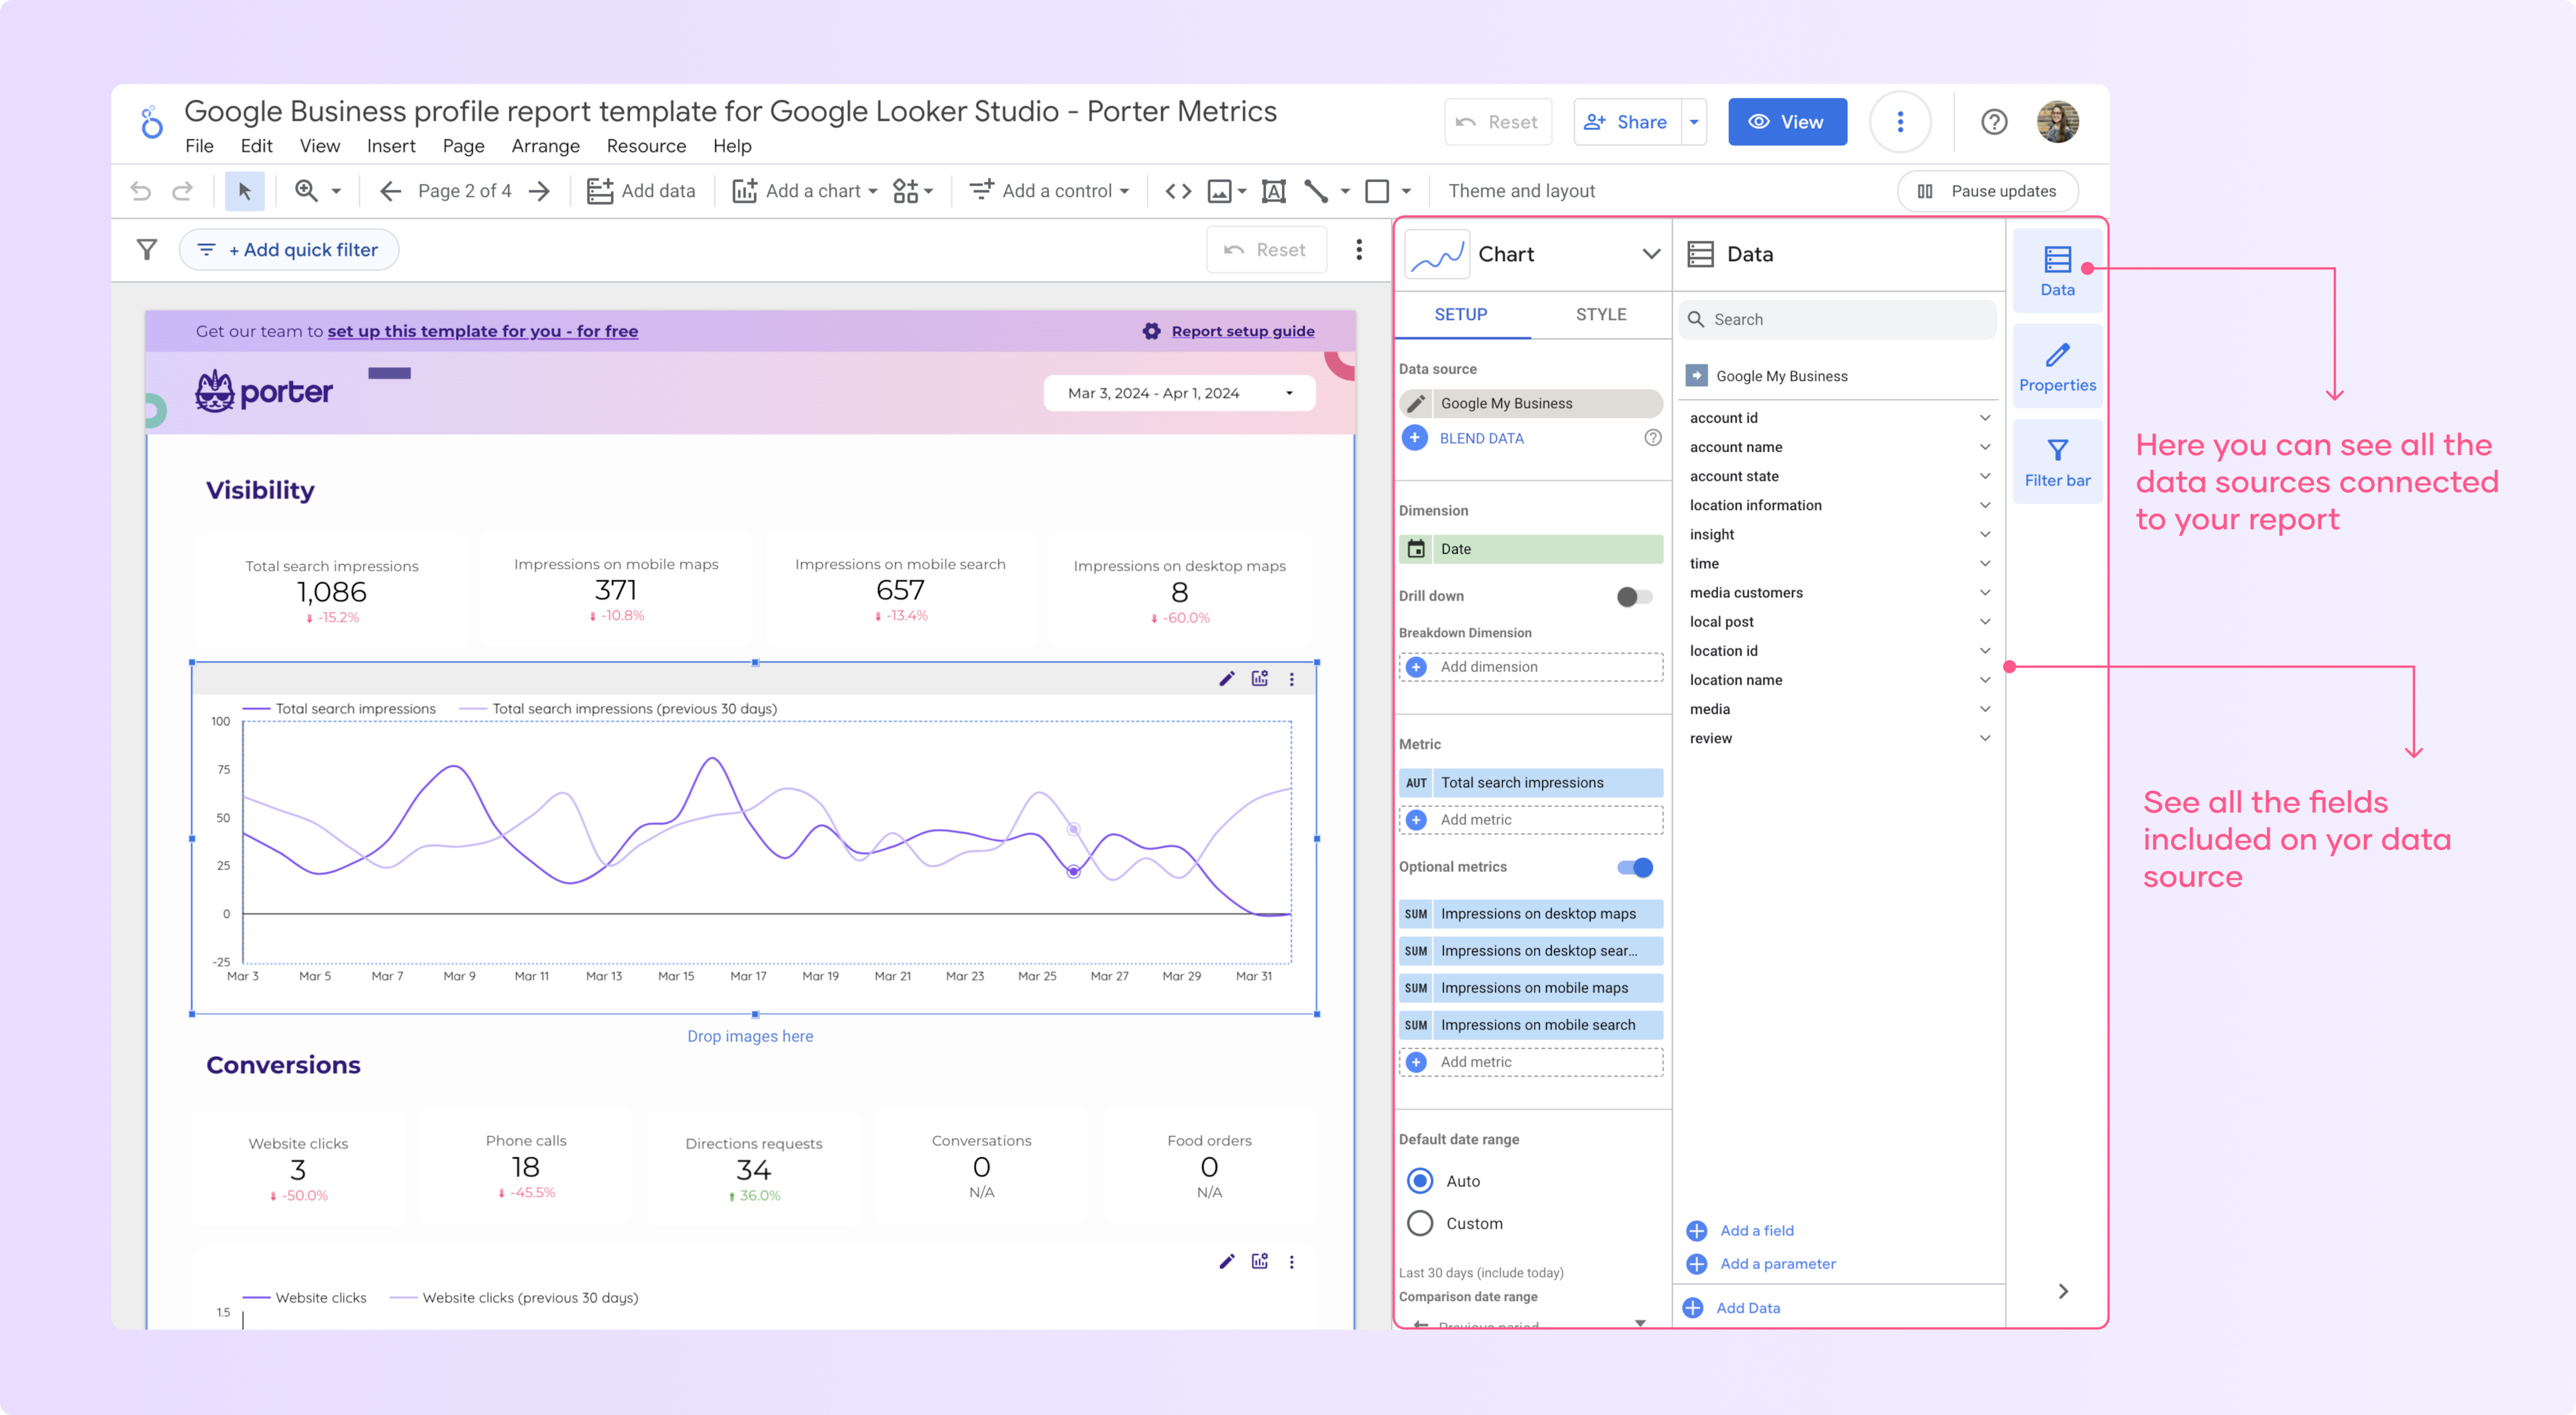 Visualize your data source and the fields on your Looker Studio report